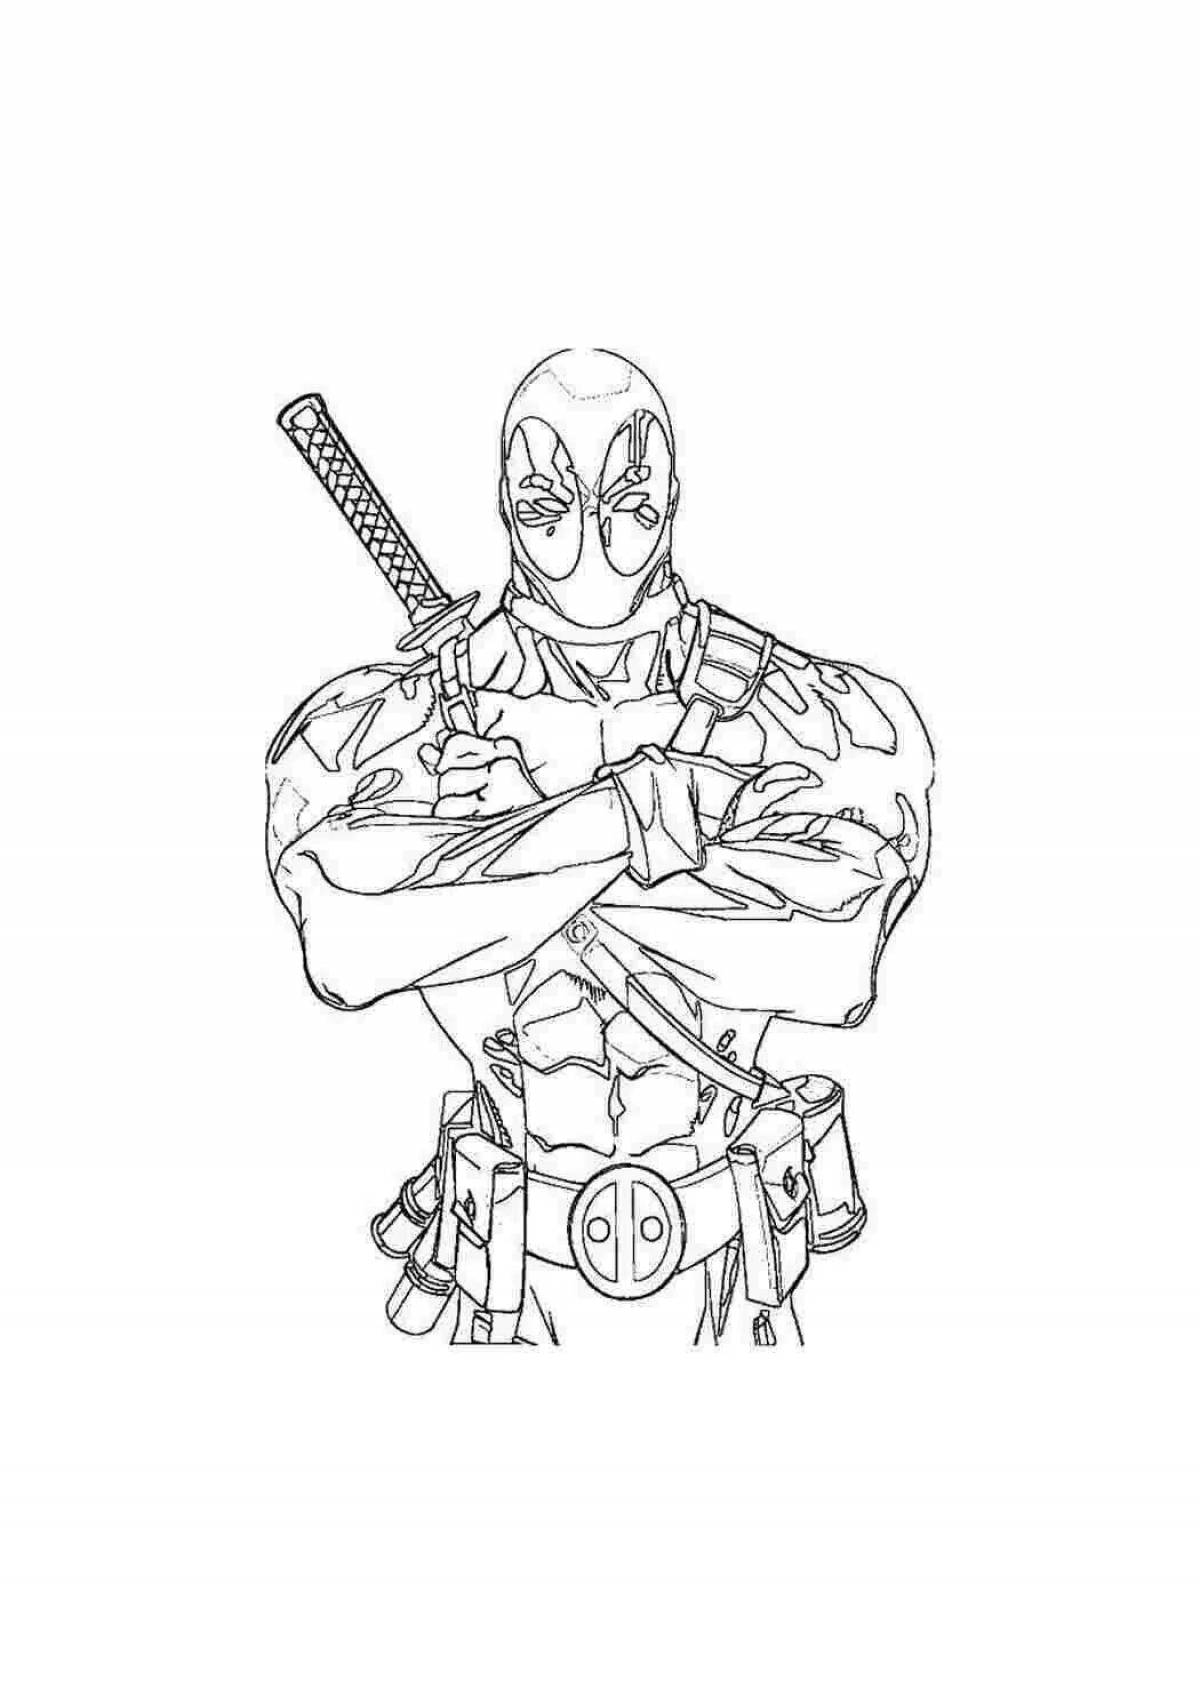 Awesome coloring pages of deadpool and spiderman for kids